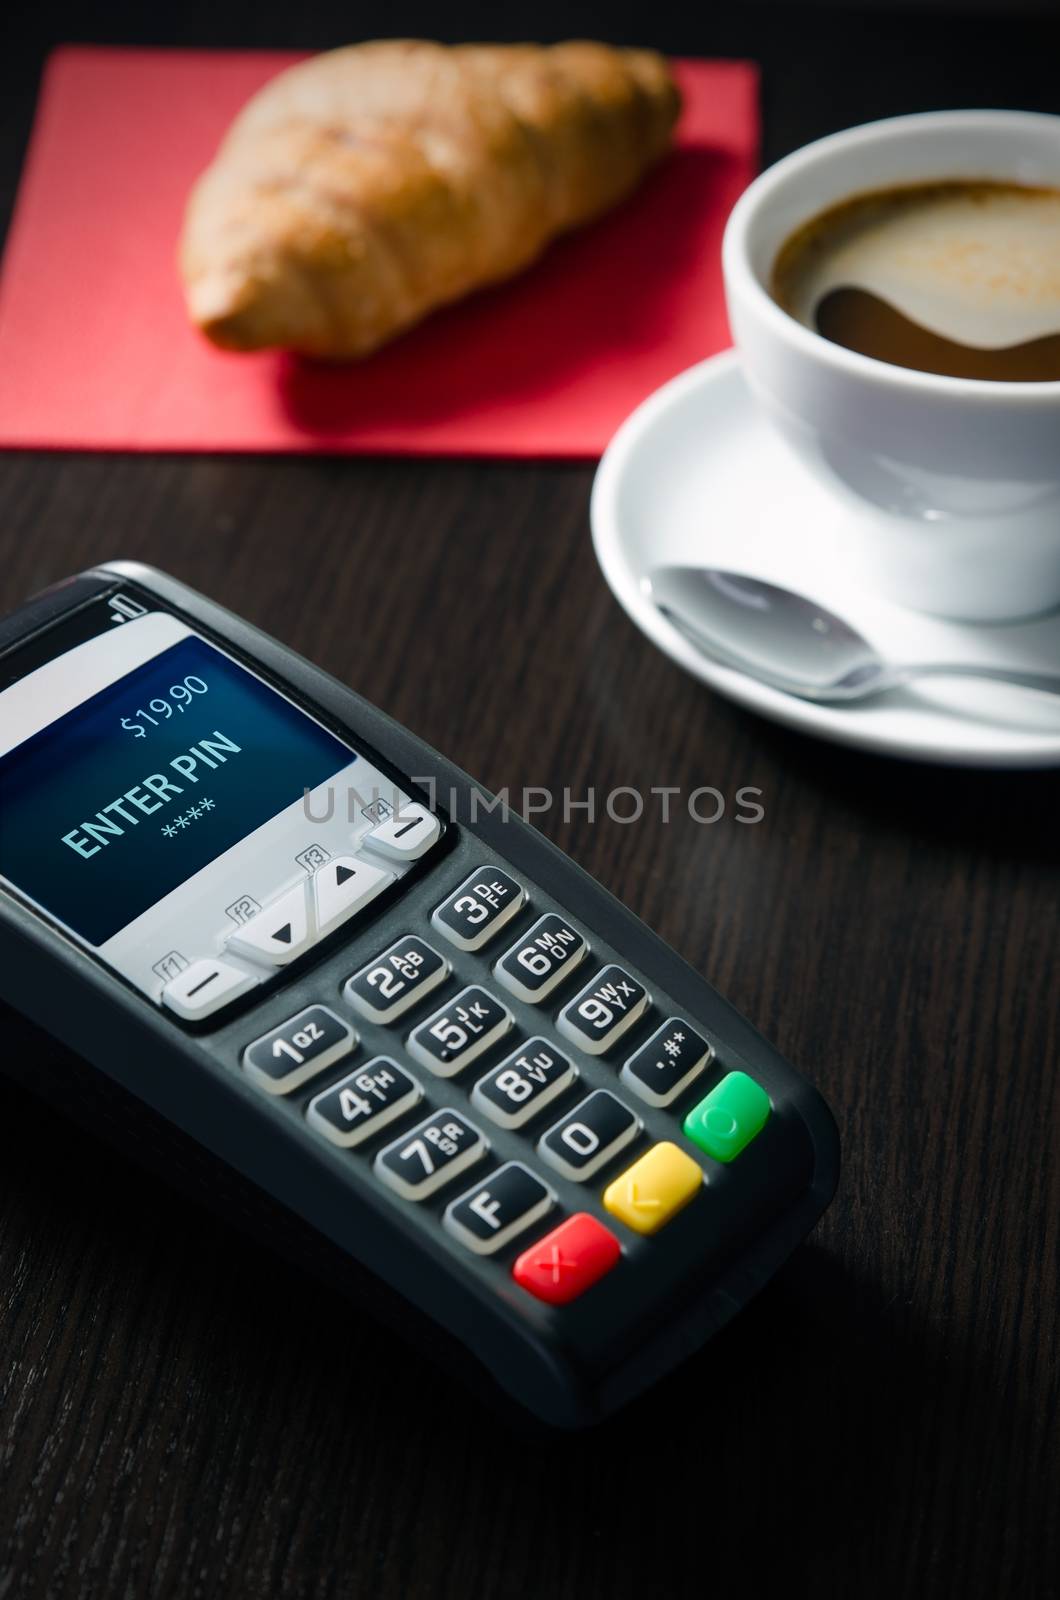 Credit card payment terminal for sale in restaurant by simpson33